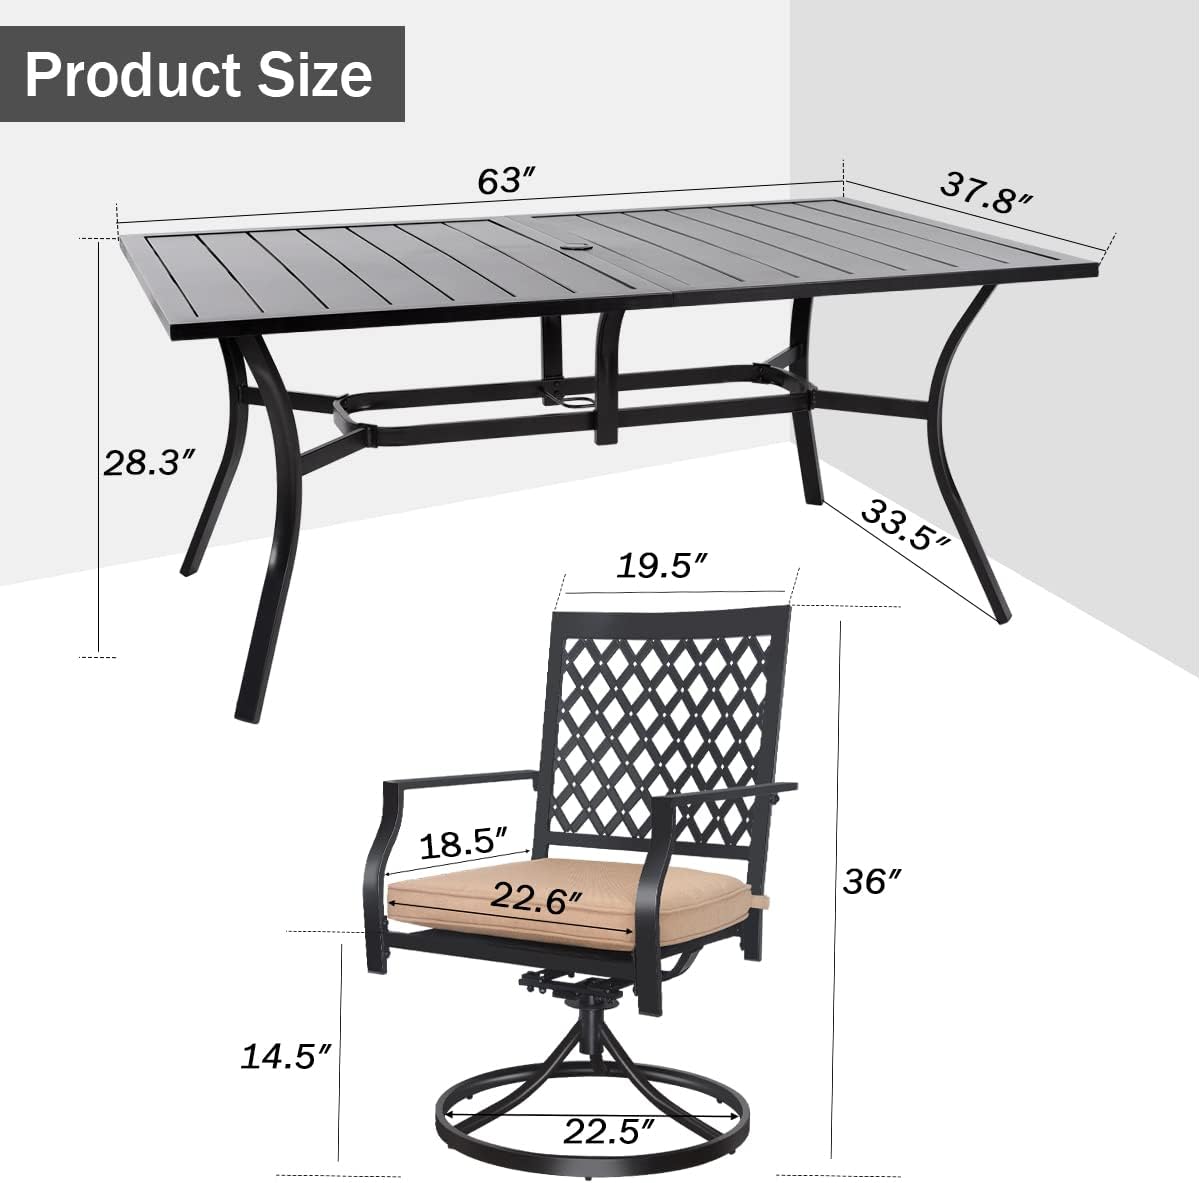 7-Piece Patio Dining Sets with Cushions, 6 Swivel Chairs & 63" Rect Table (1.57" Umbrella Hole)